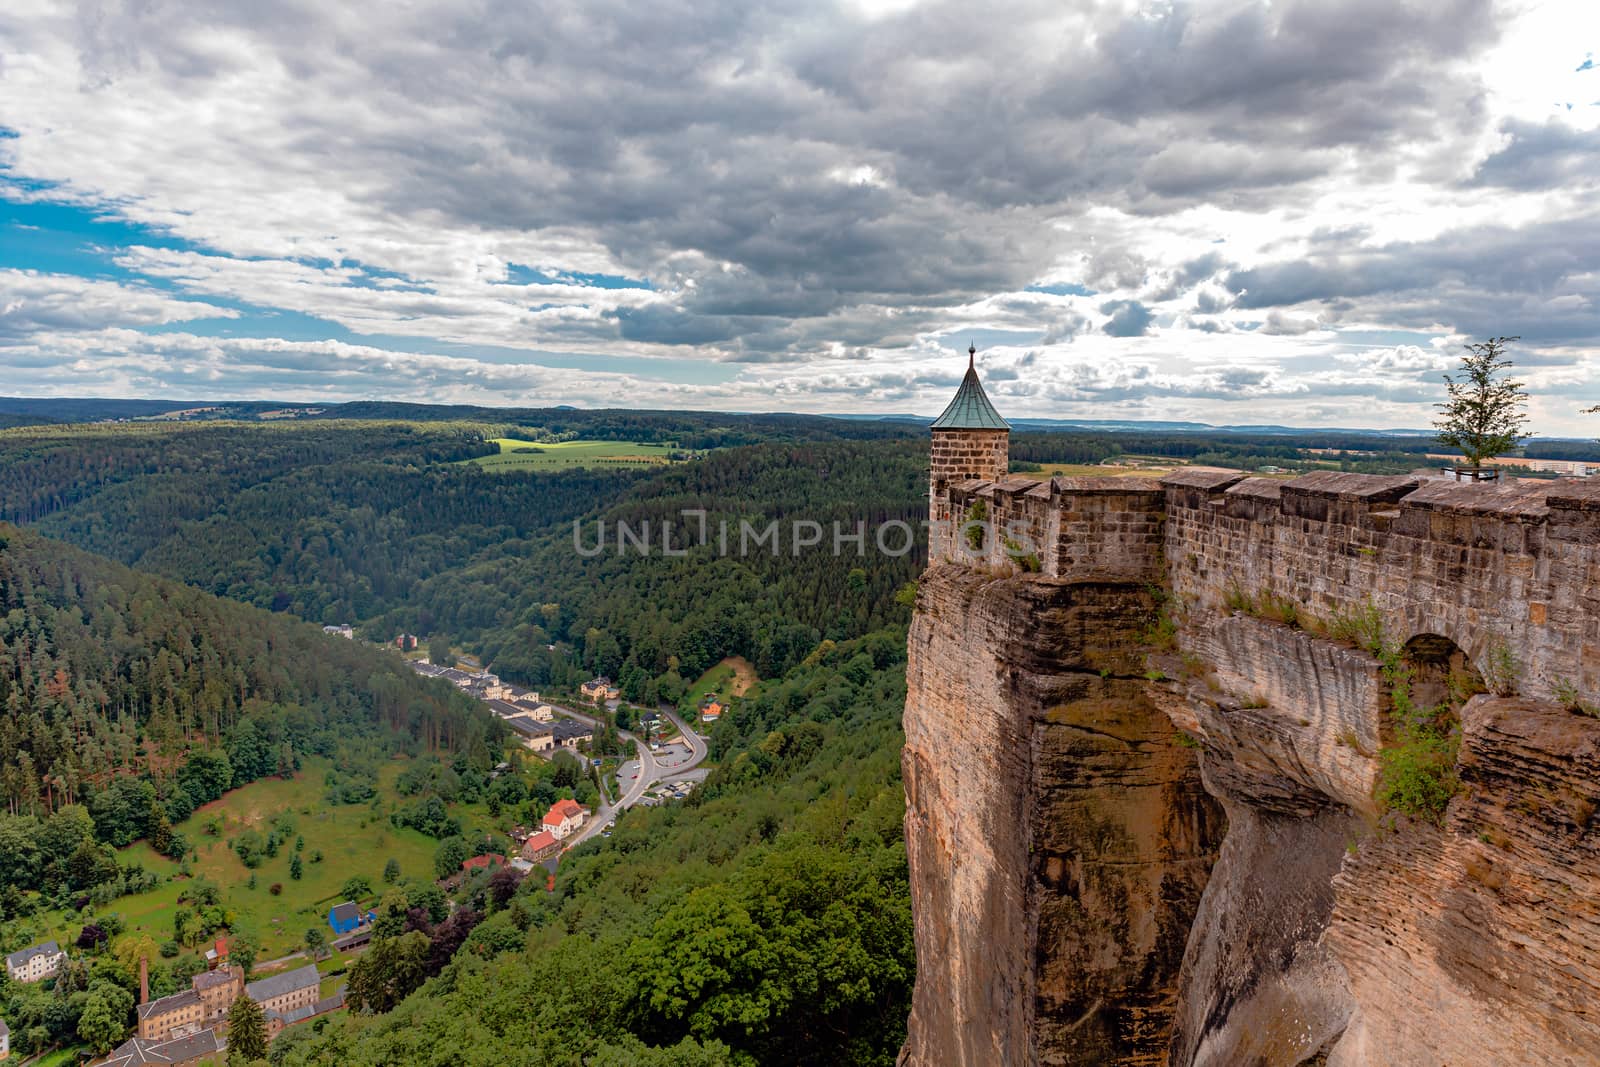 Elbe Sandstone Mountains - Königstein Fortress, one of the larg by seka33